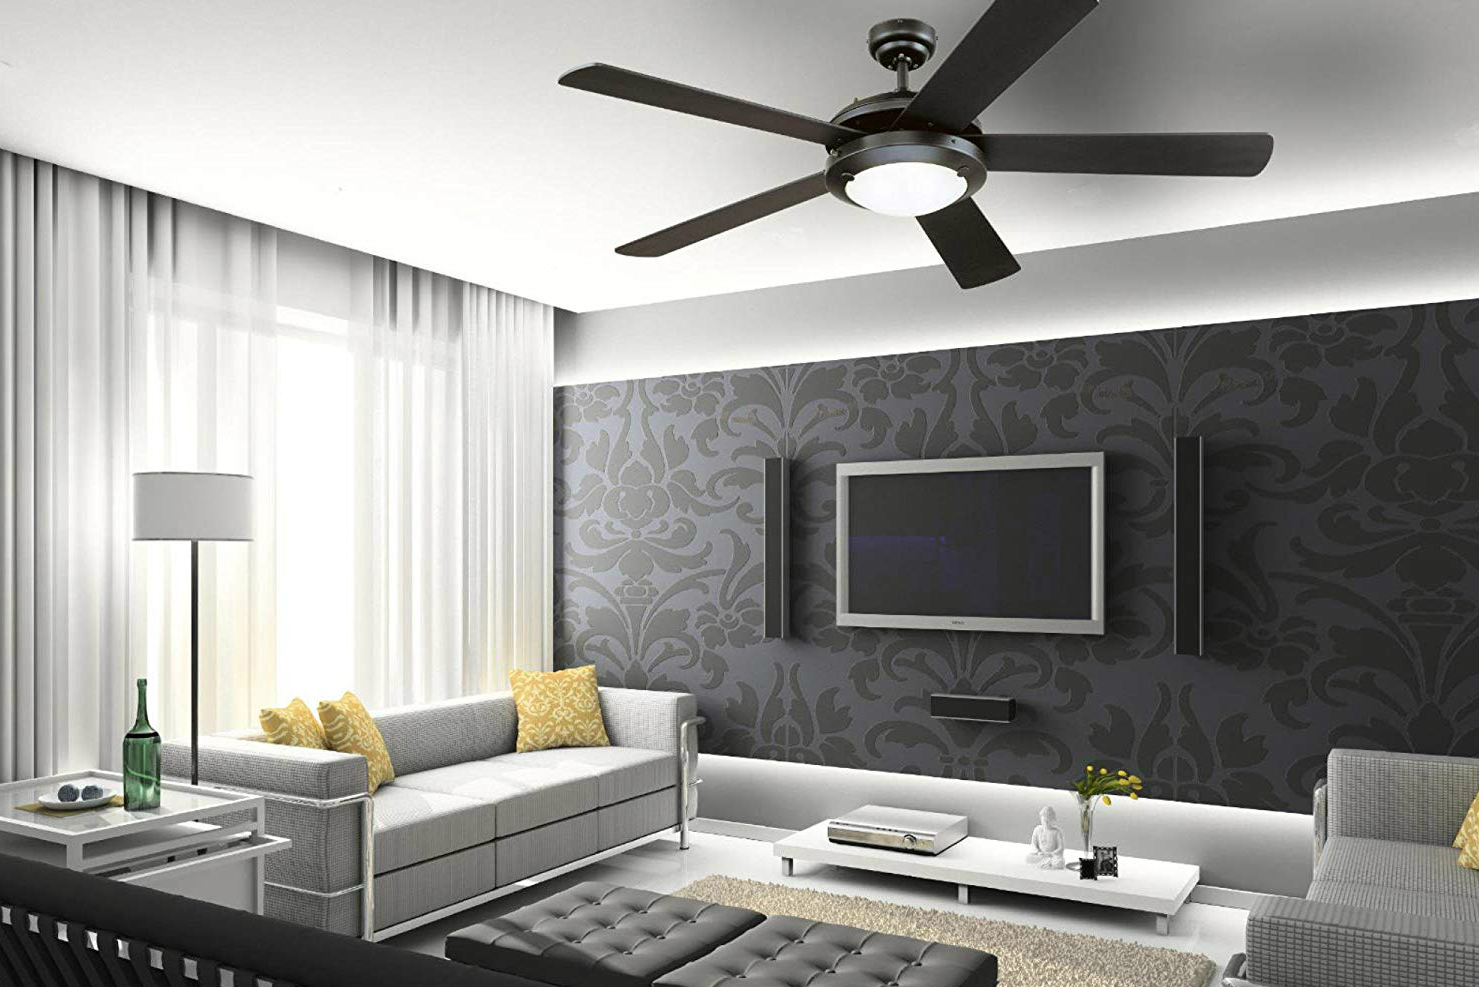 The 5 Best Smart Ceiling Fans For Your